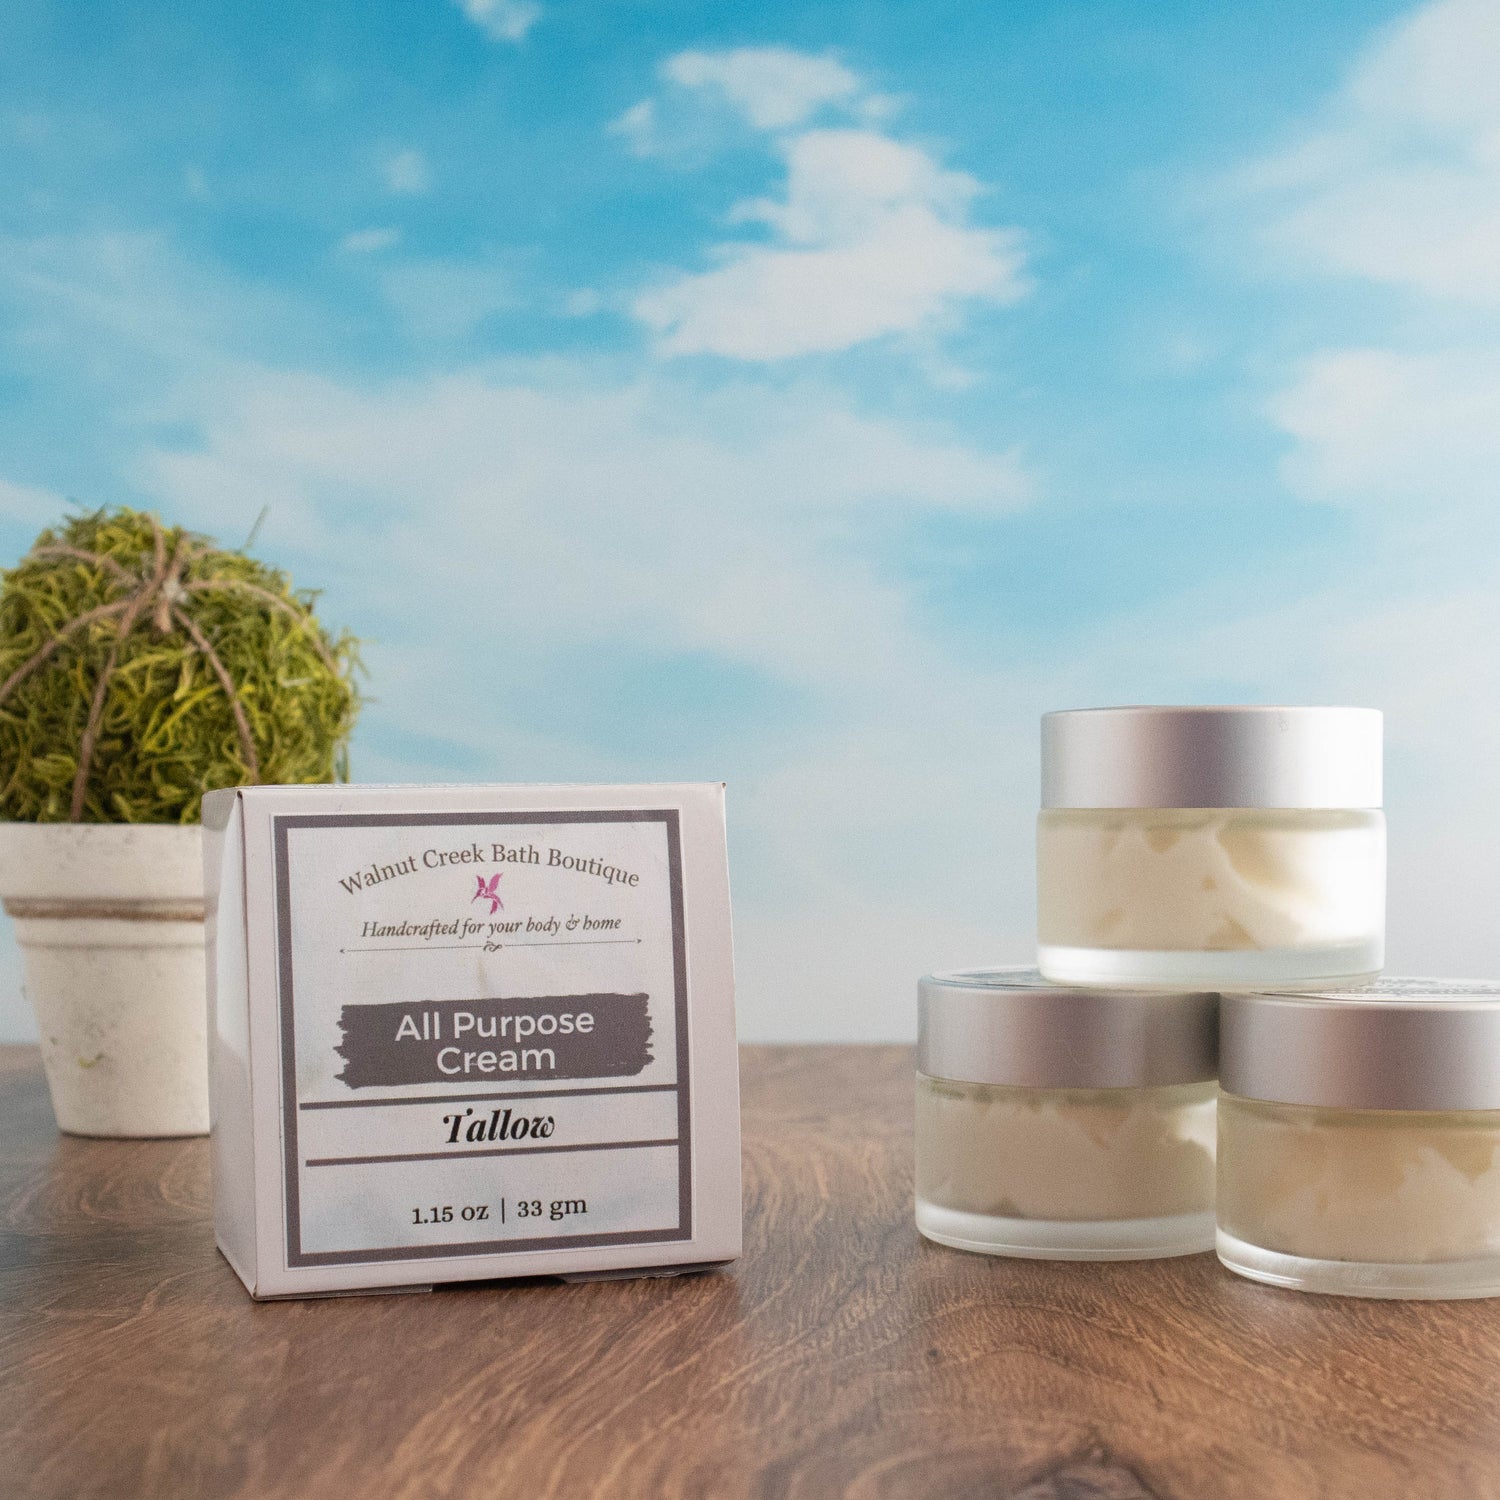 there are 3 tallow face cream jars stacked to the right and slightly in front of this is a box which is the outer package of the product. there is a stone vase with a greenery ball. everything is sitting on a wood board and there is a sky background.